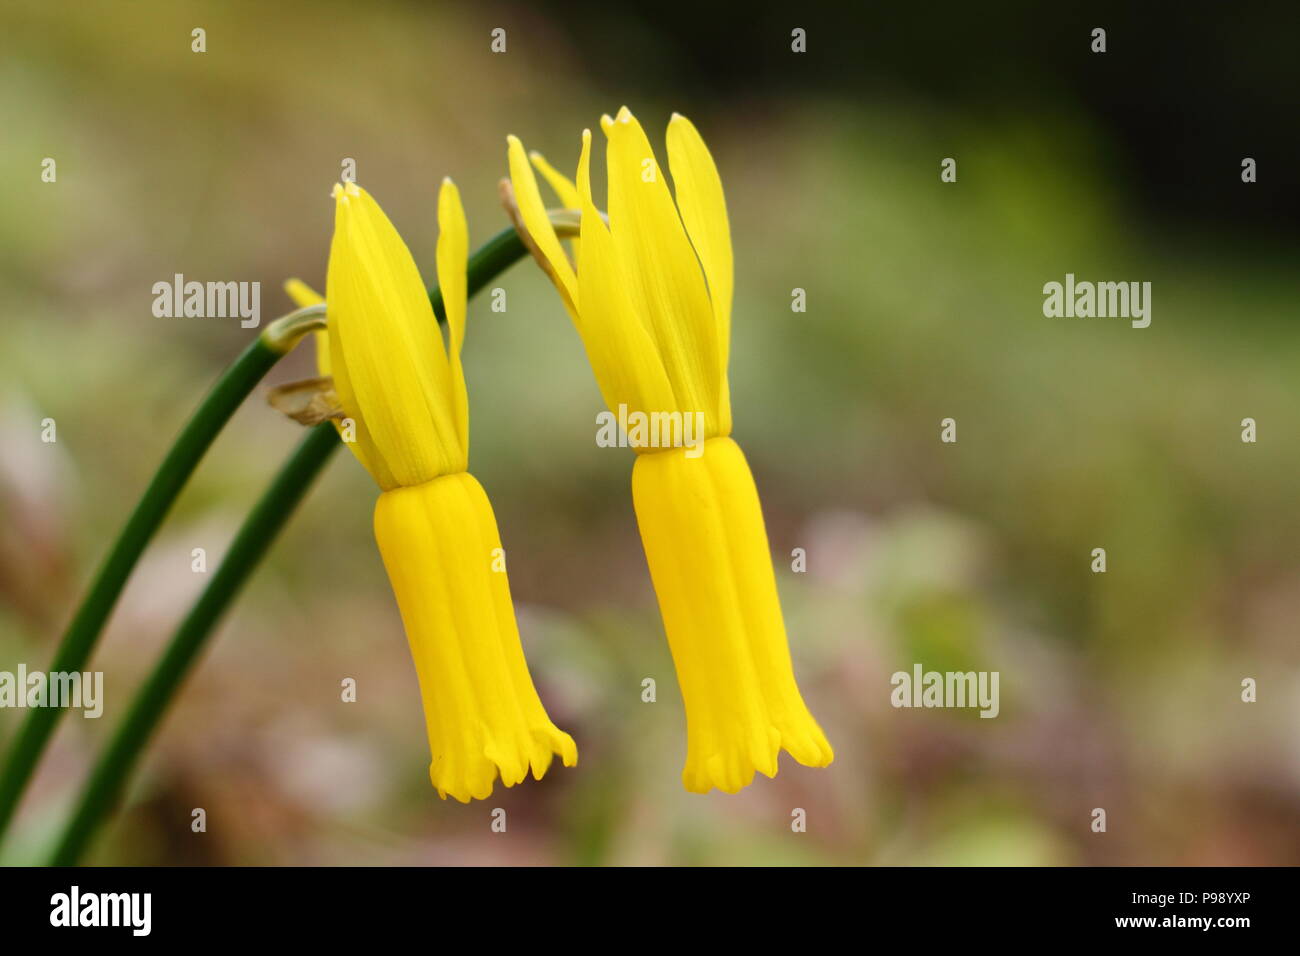 Narcissus cyclamineus. Cyclamen flowered daffodil in early spring, UK Stock Photo